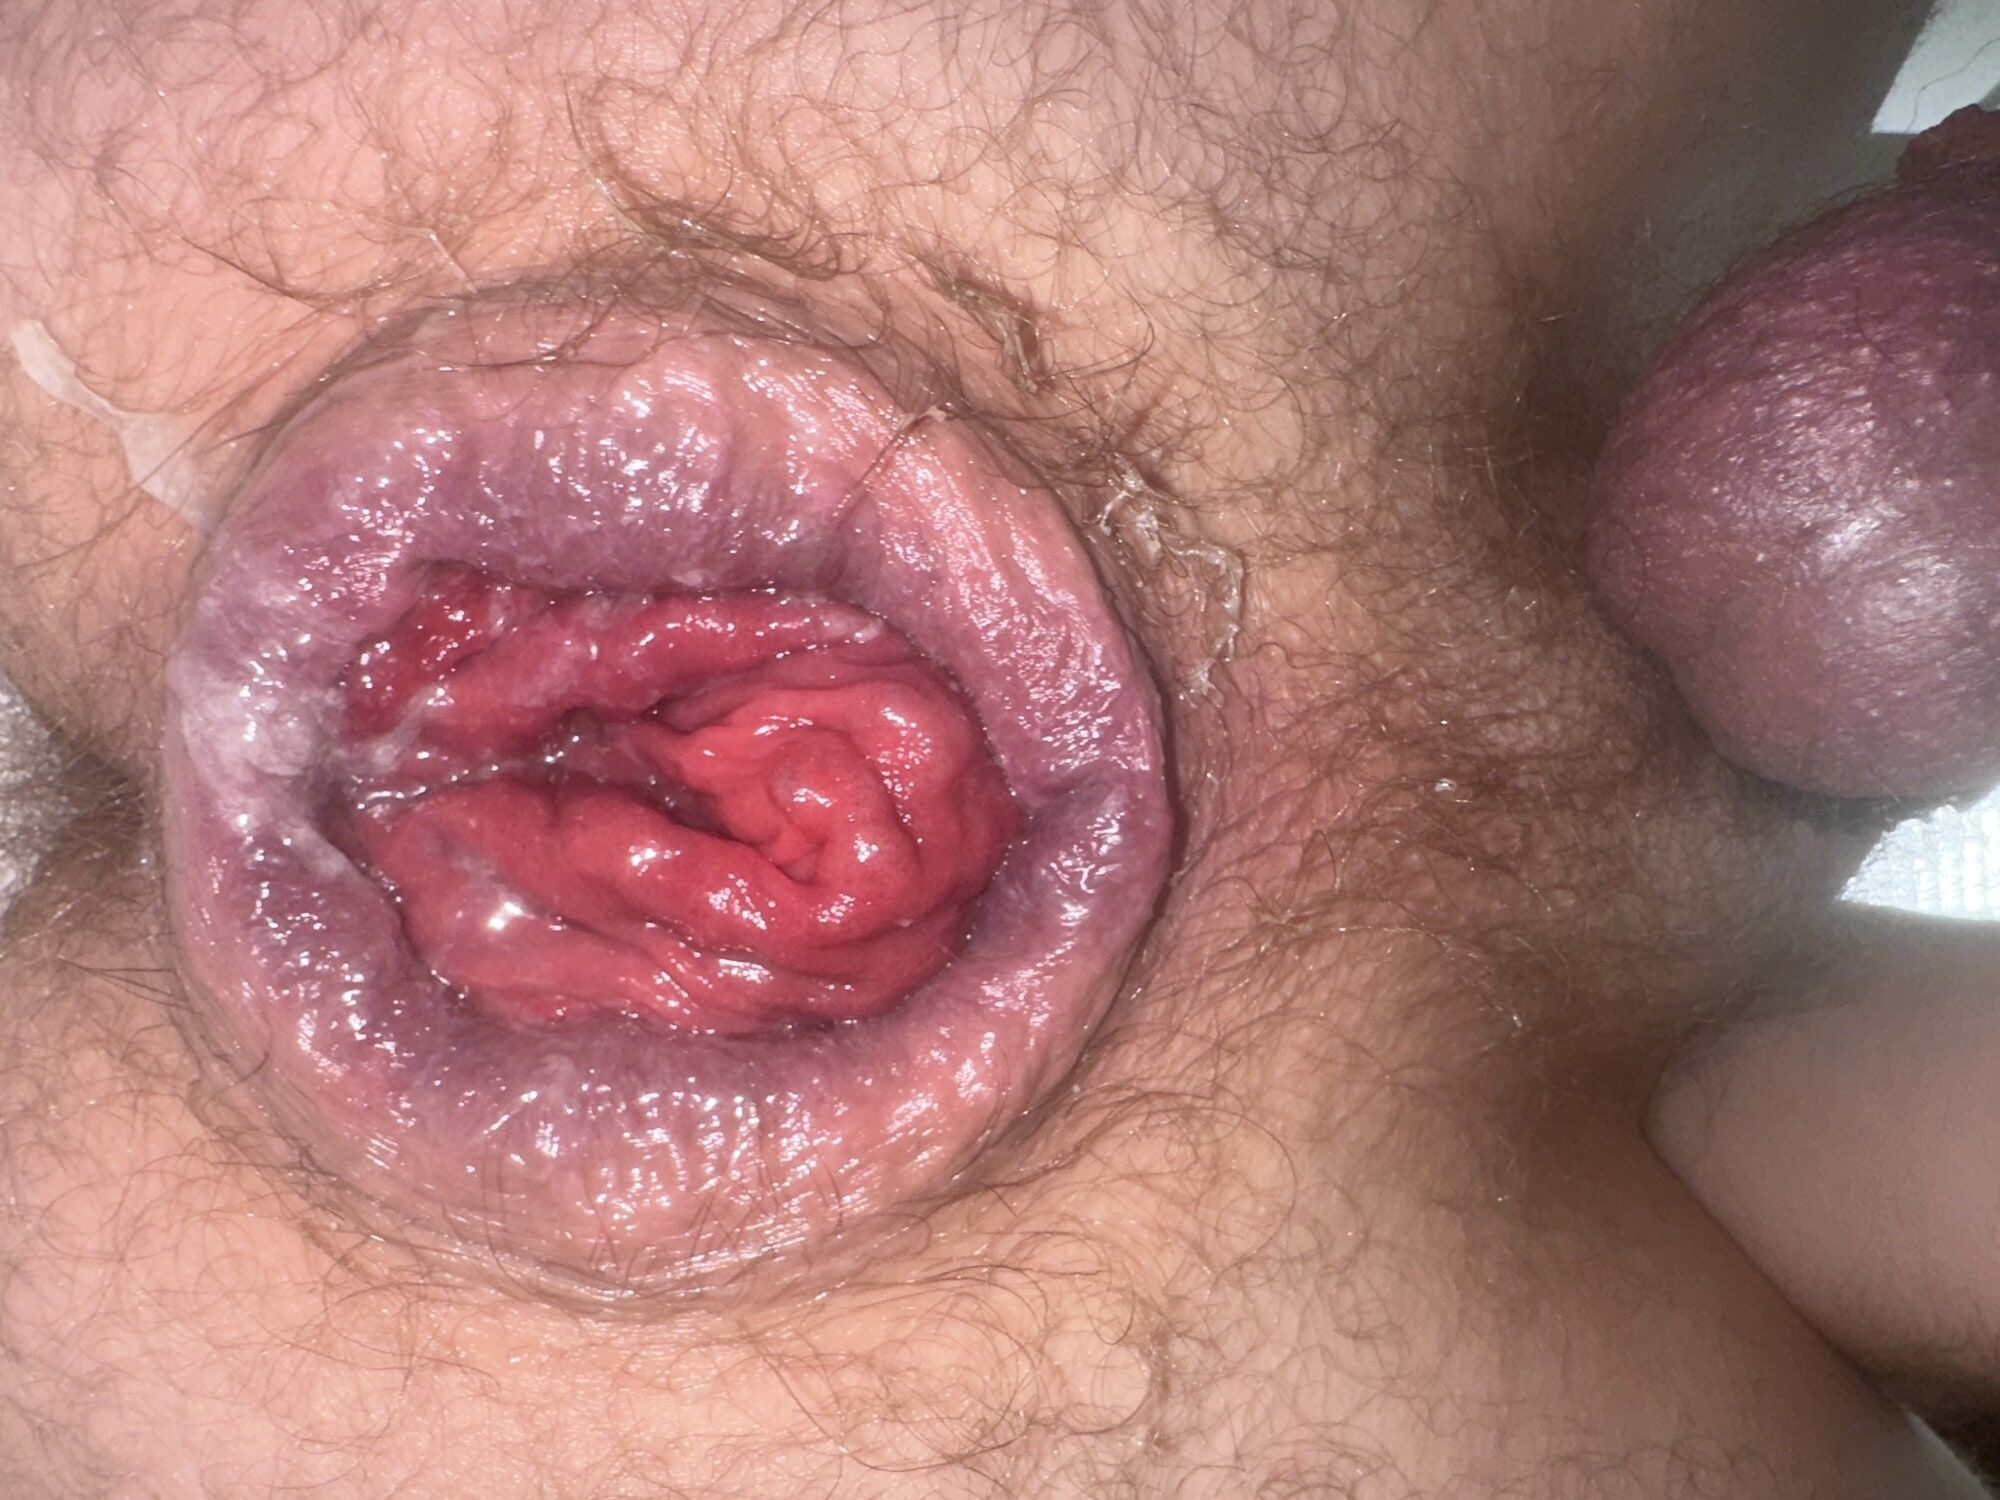 Anal prolapse in oxball ff pighole #16